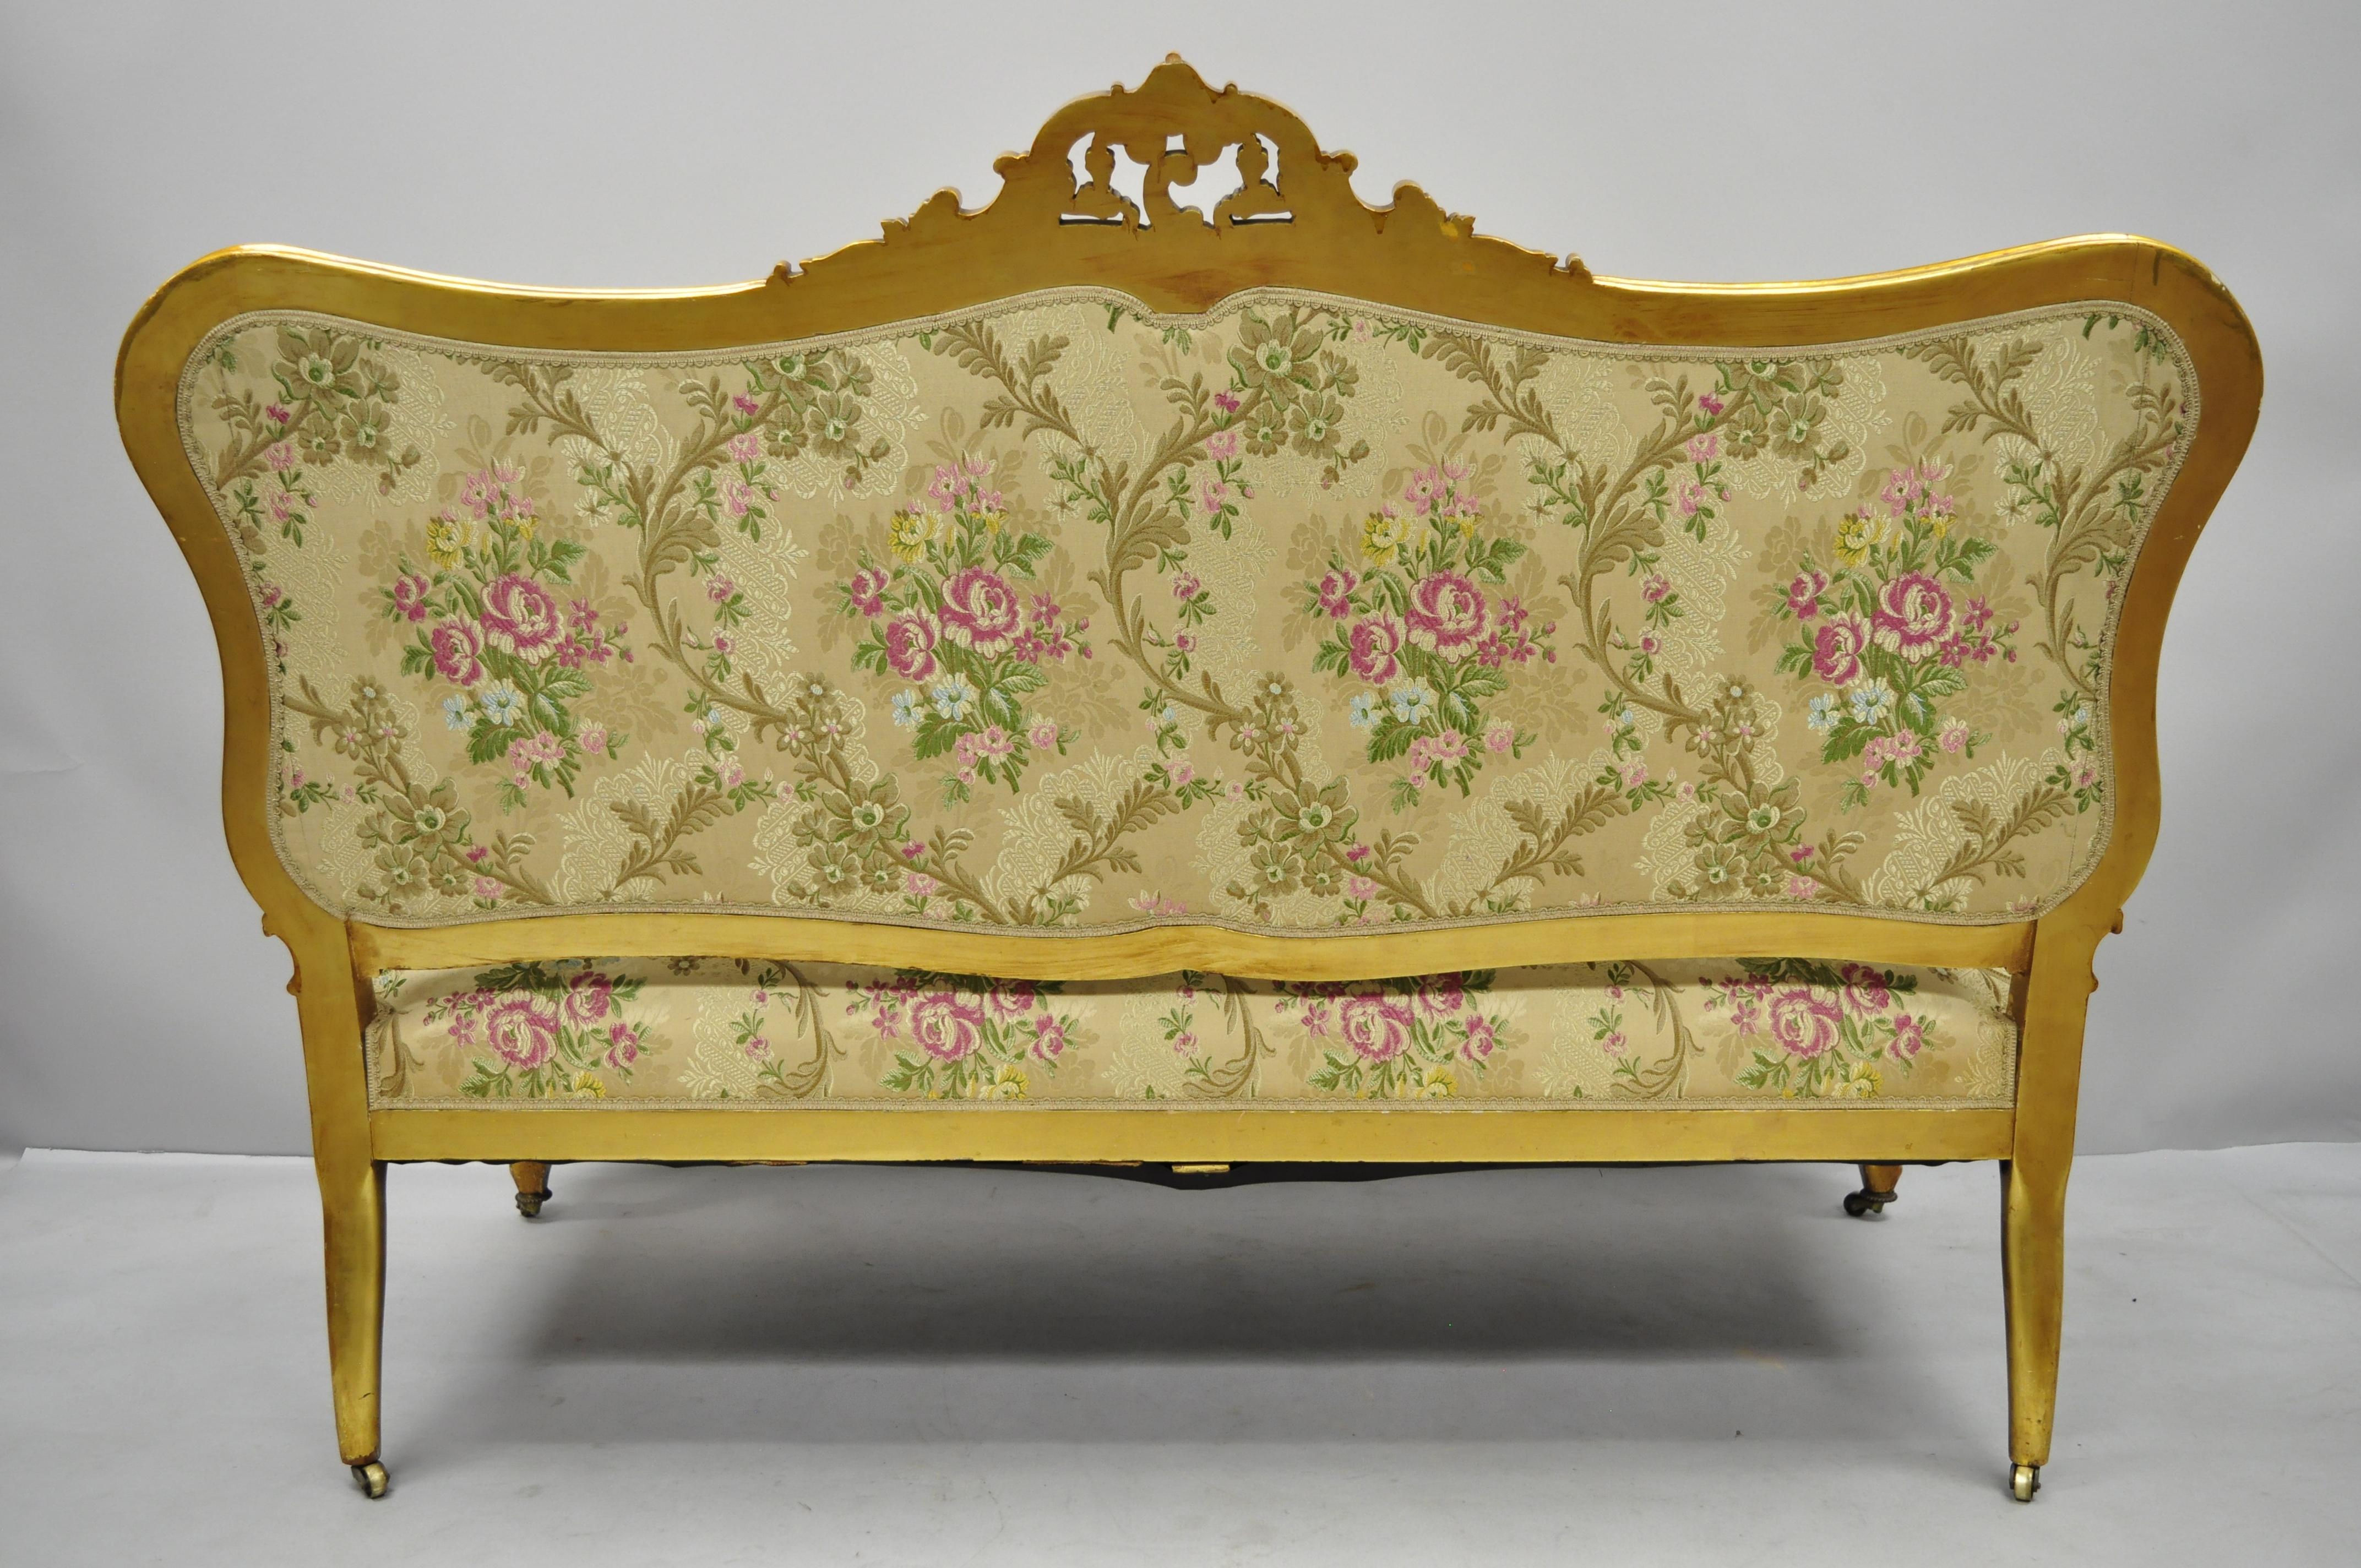 1920s, French, Louis XV Style Gold Gilt Settee Loveseat Sofa 1